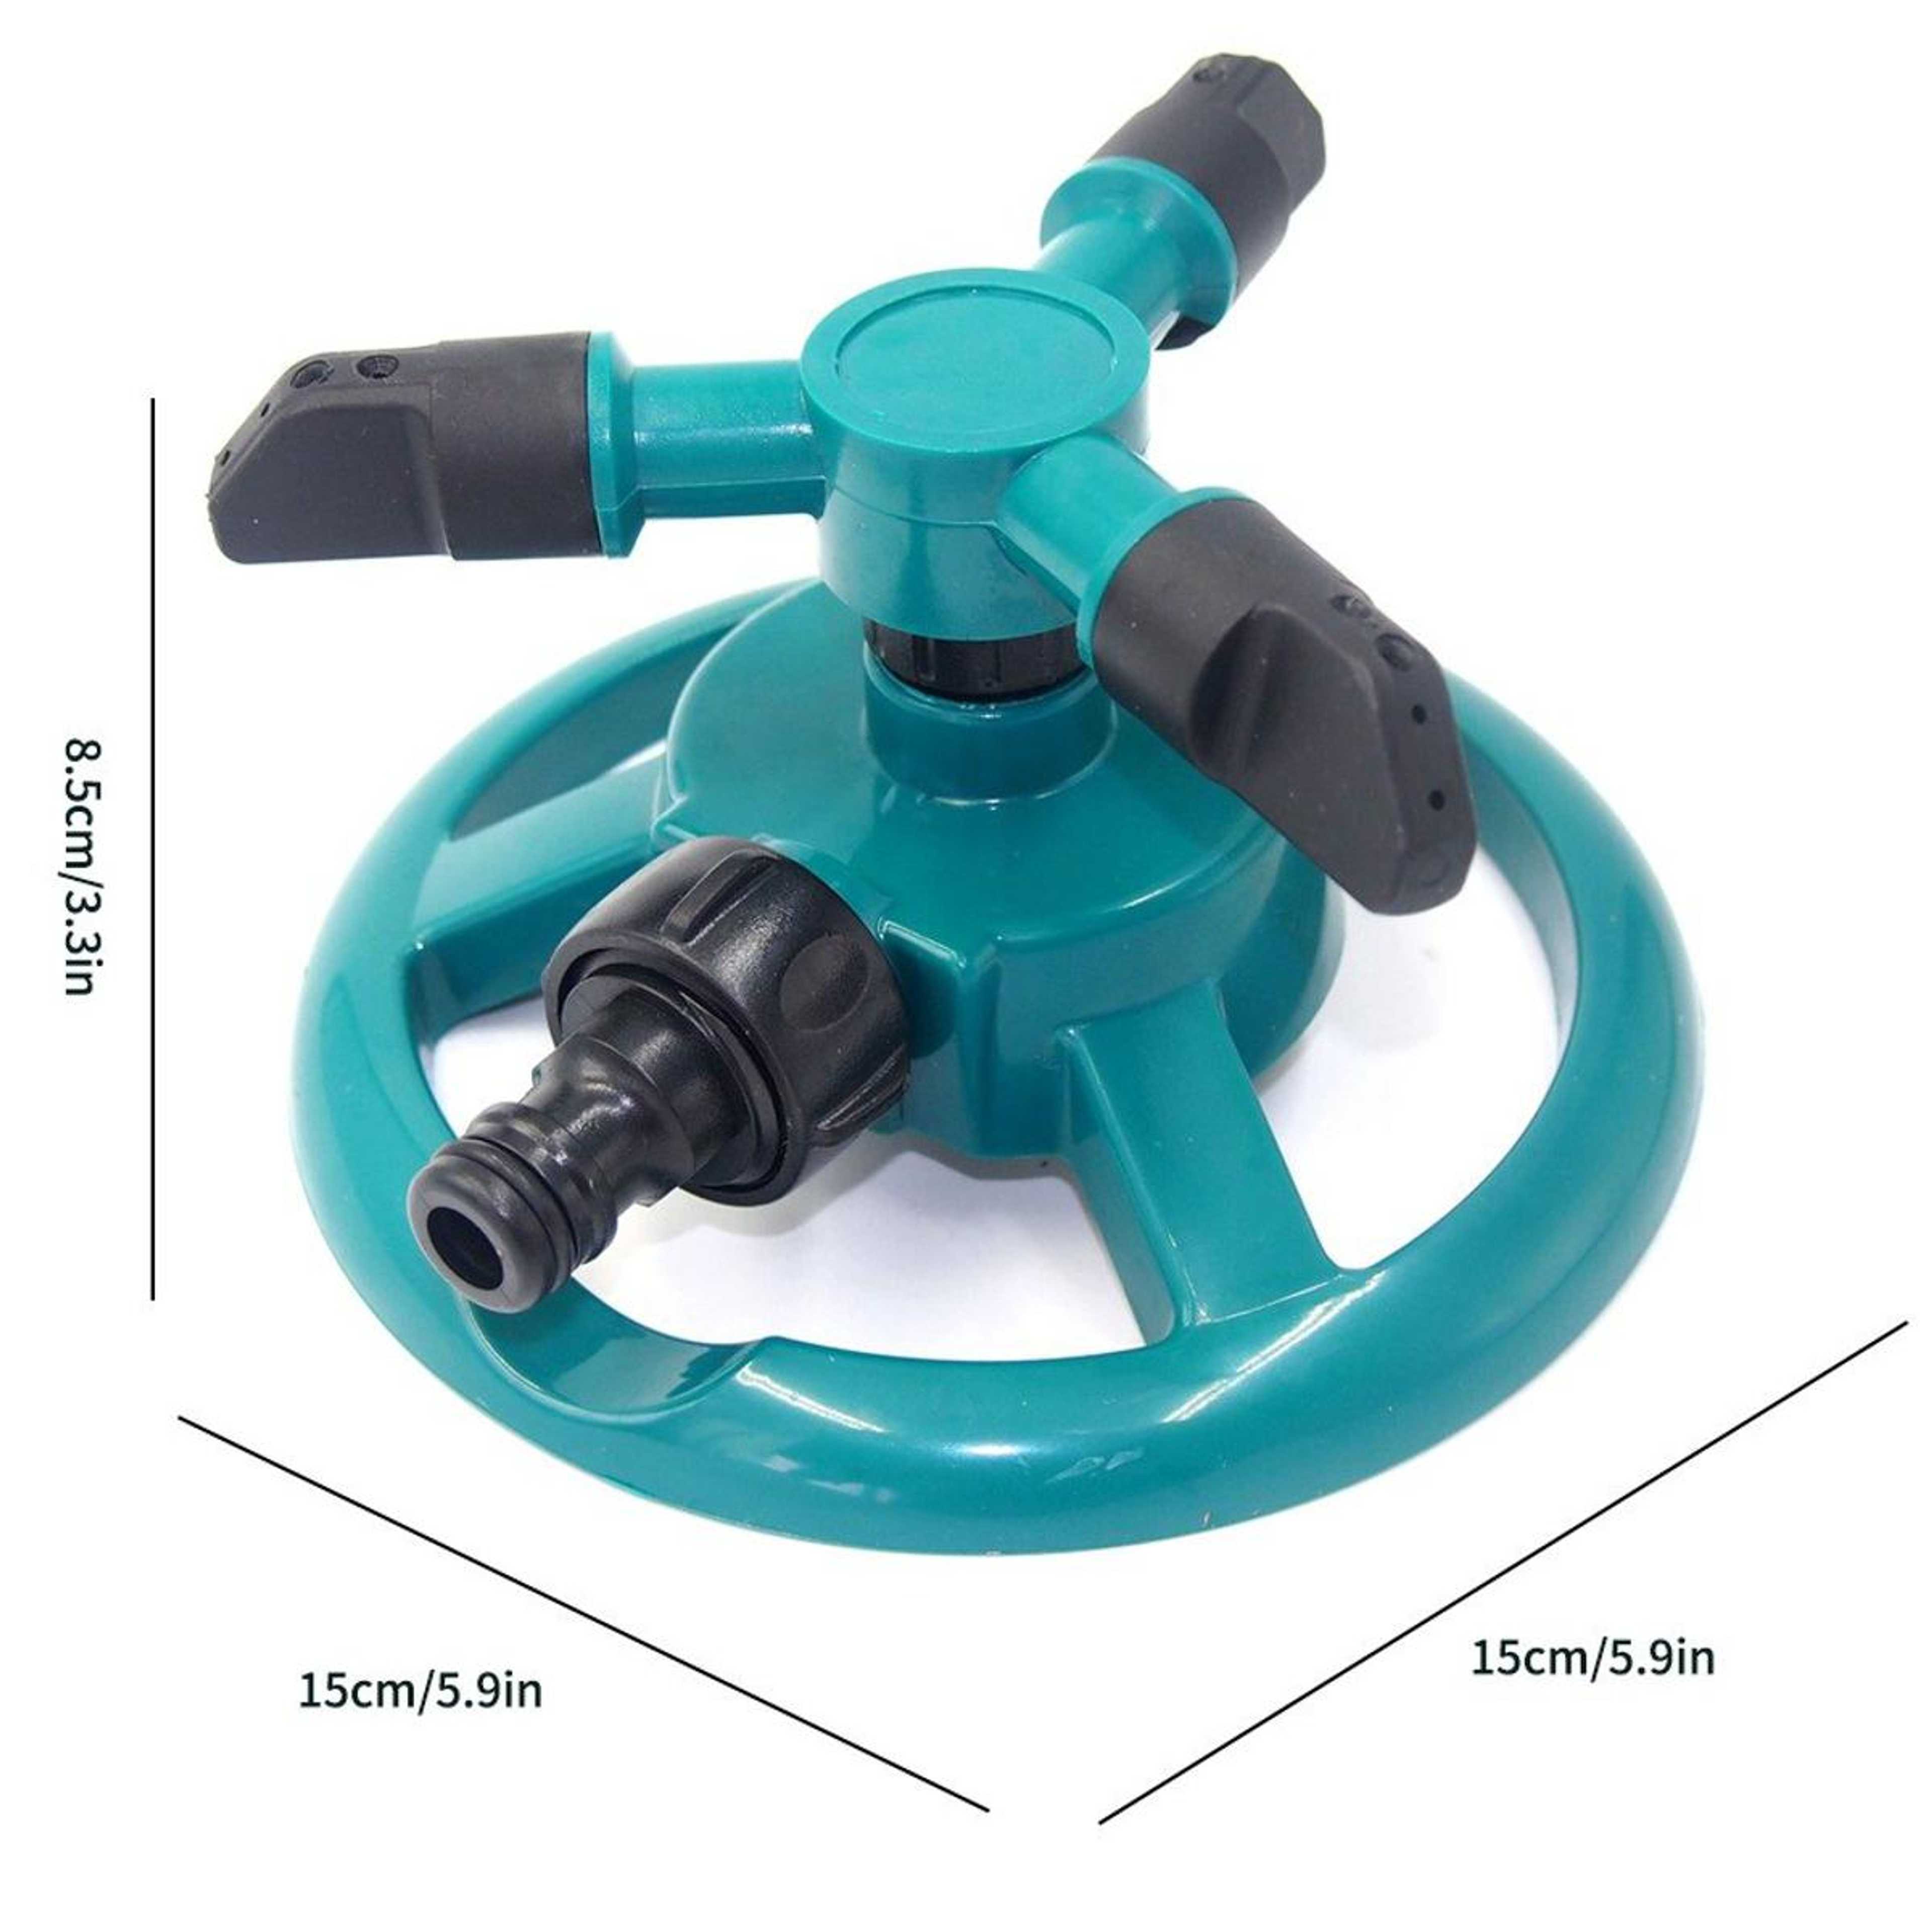 1pc Adjustable Spiral Watering Can Nozzle Automatic Watering Garden Sprinklers 360 Degree Watering Grass Lawn Rotary Nozzle Rotating Water Sprinkler Irrigation system